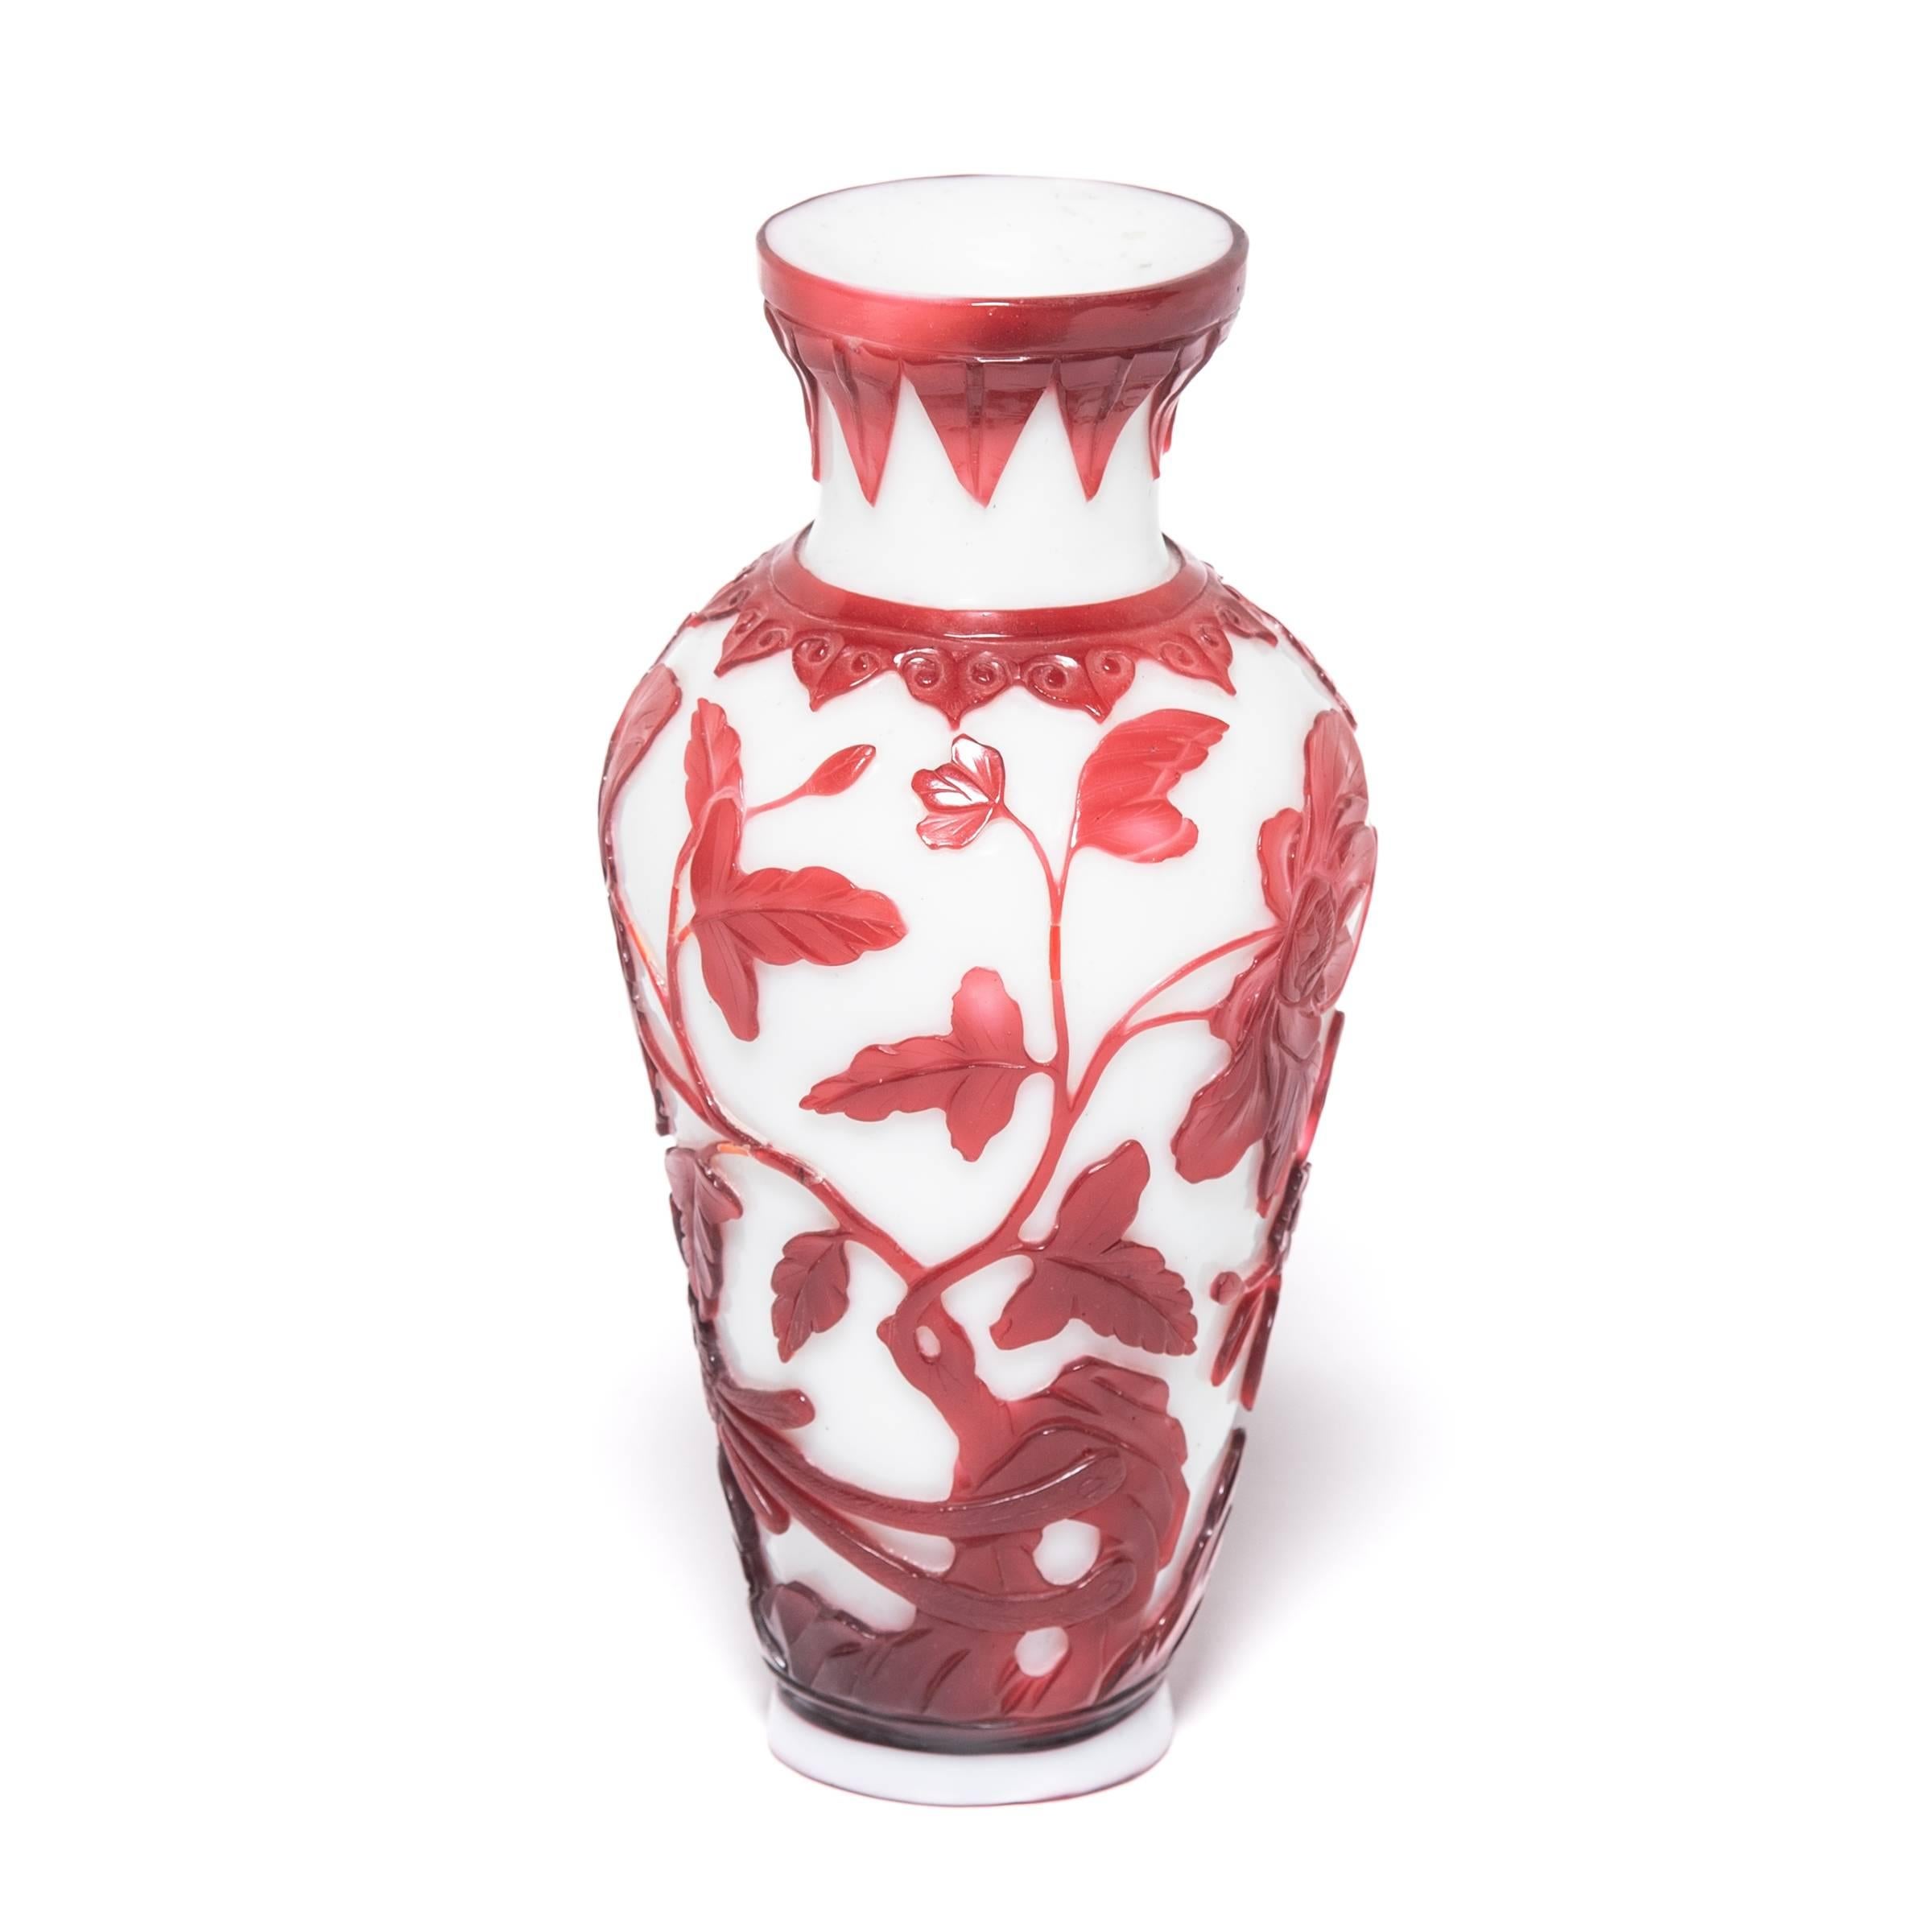 Although practiced for centuries, Chinese glass-making came into prominence during the Qing dynasty with the introduction of Peking glass. Adapting European technologies, workshops in the Imperial Palace began creating layered and intricately-carved